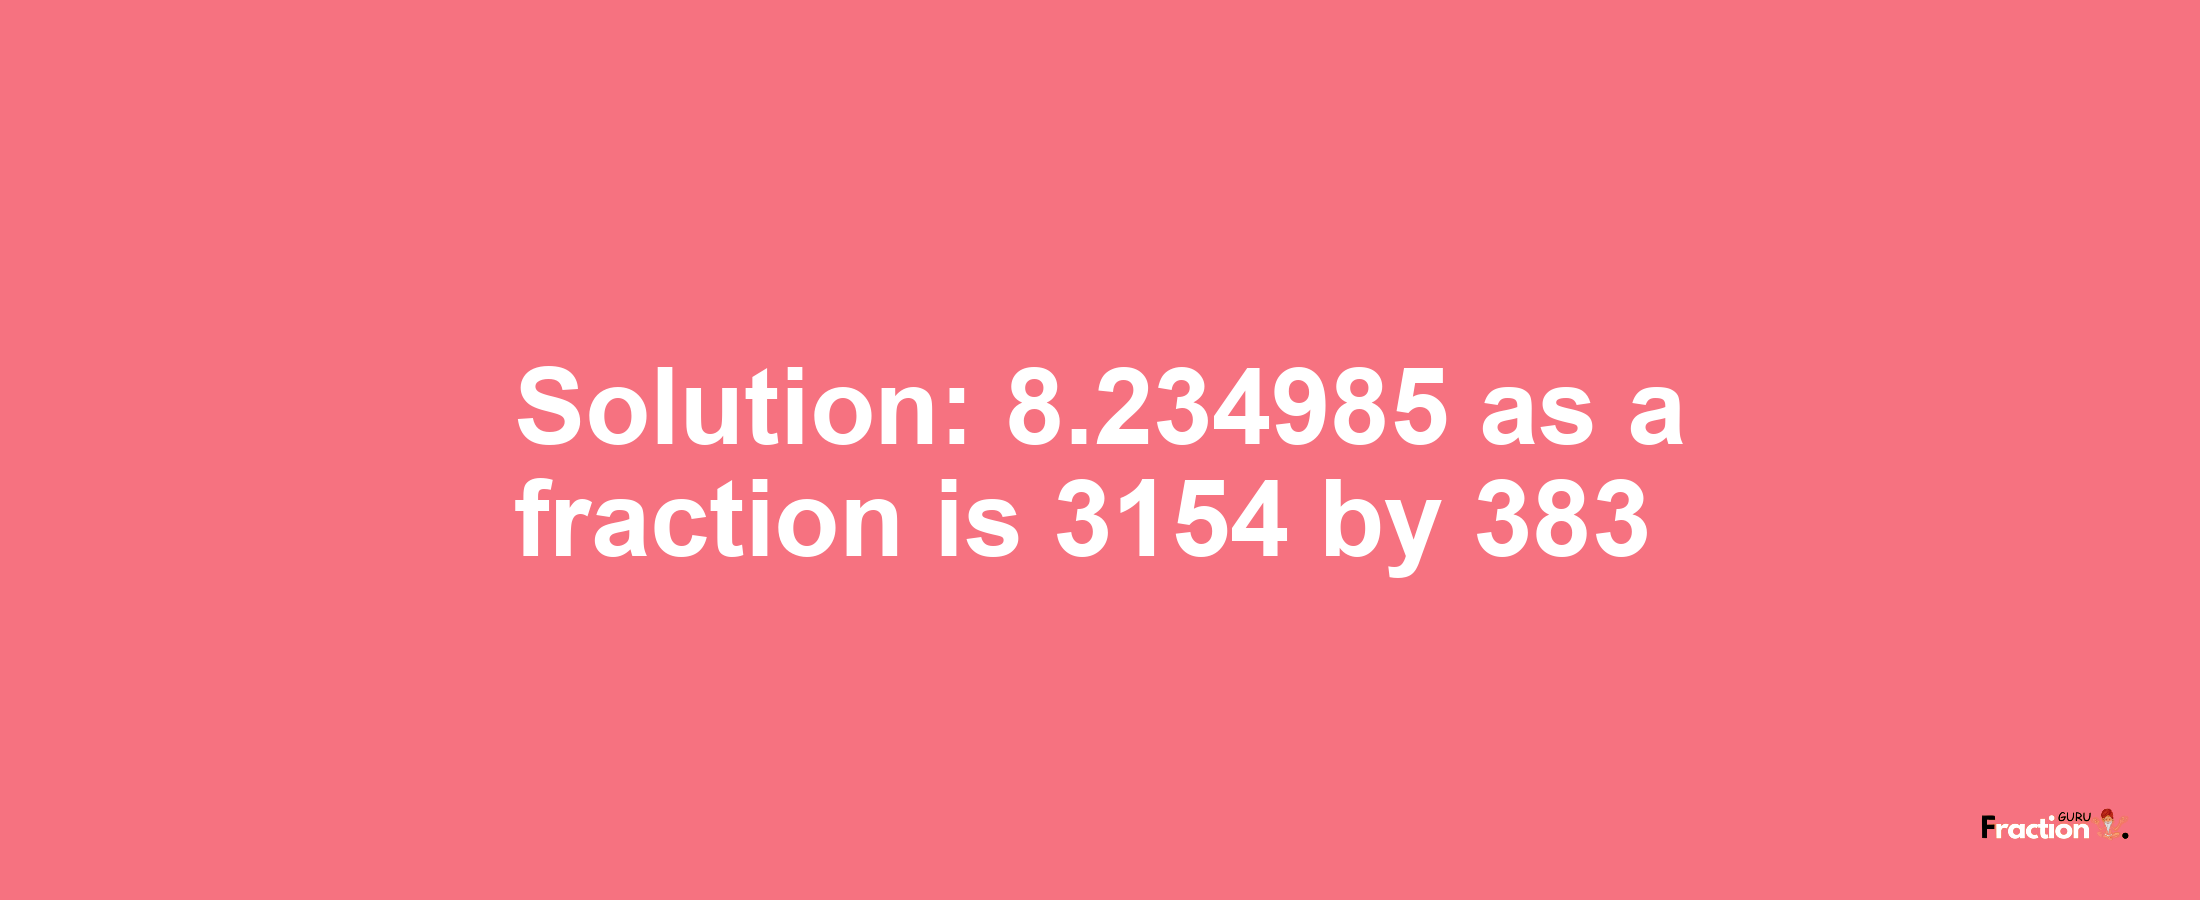 Solution:8.234985 as a fraction is 3154/383